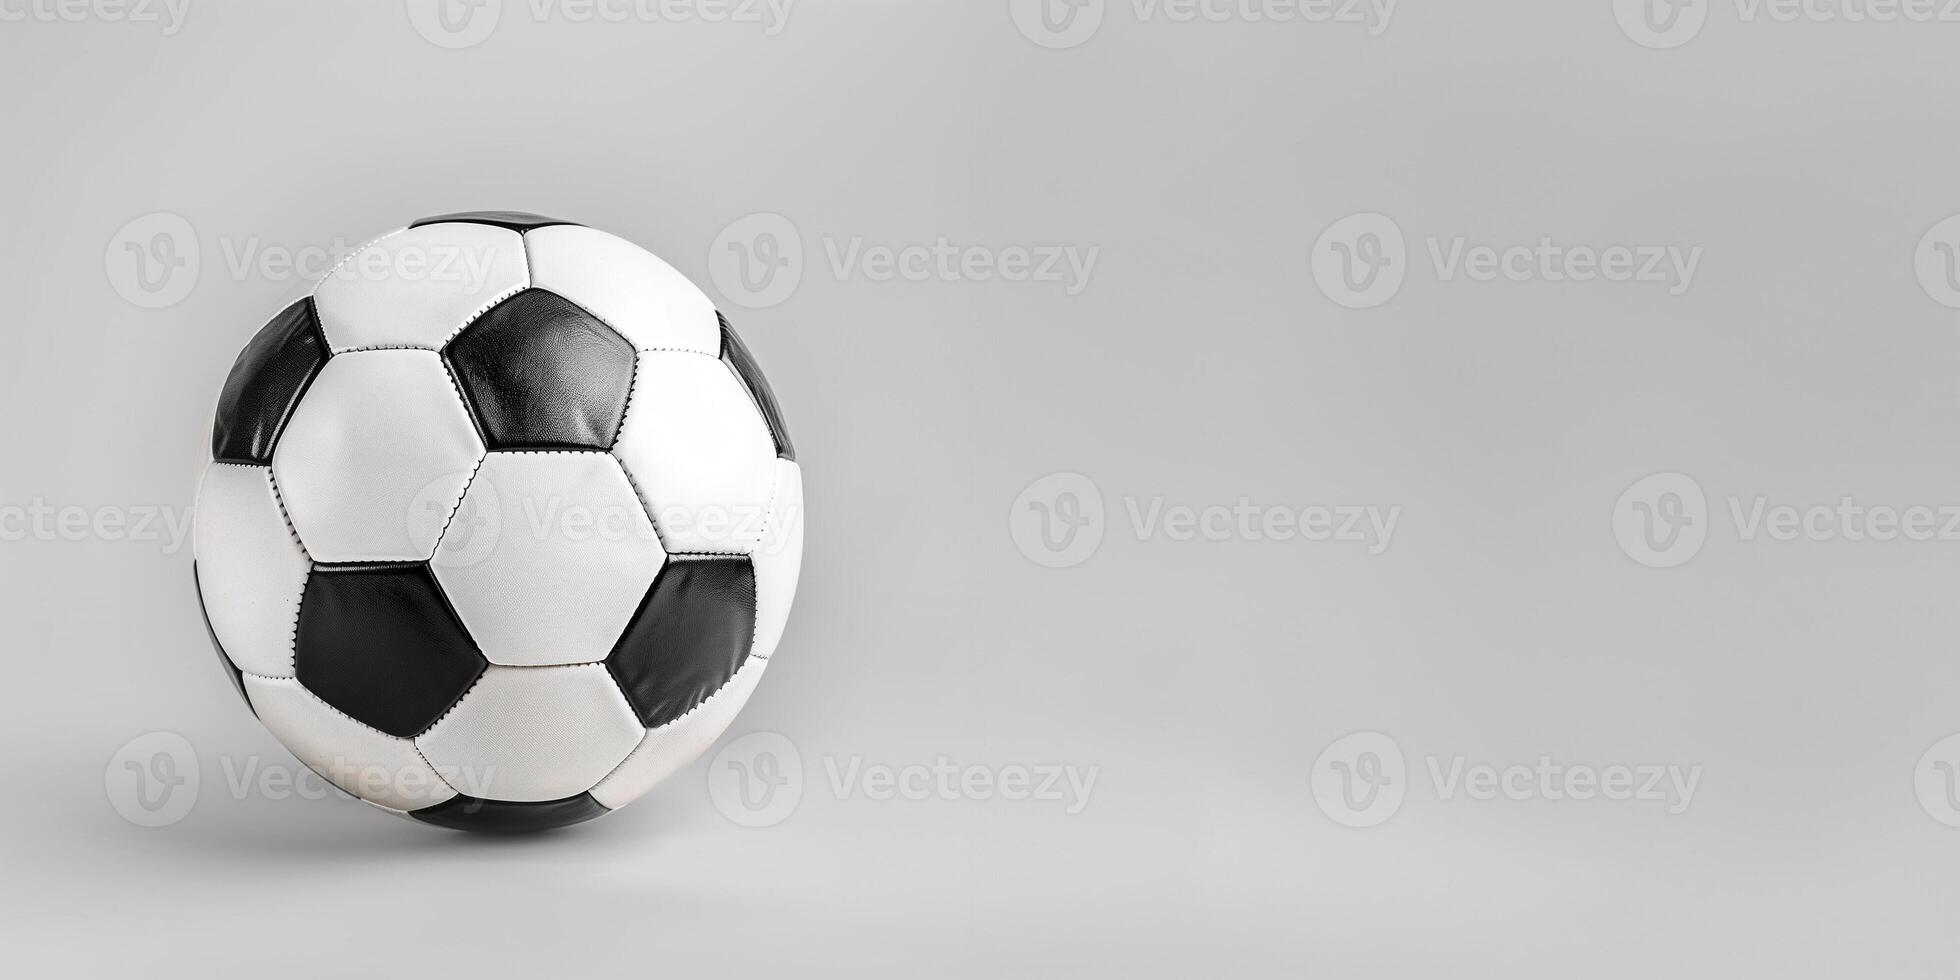 black and white soccer ball or football on gray background with copy space photo